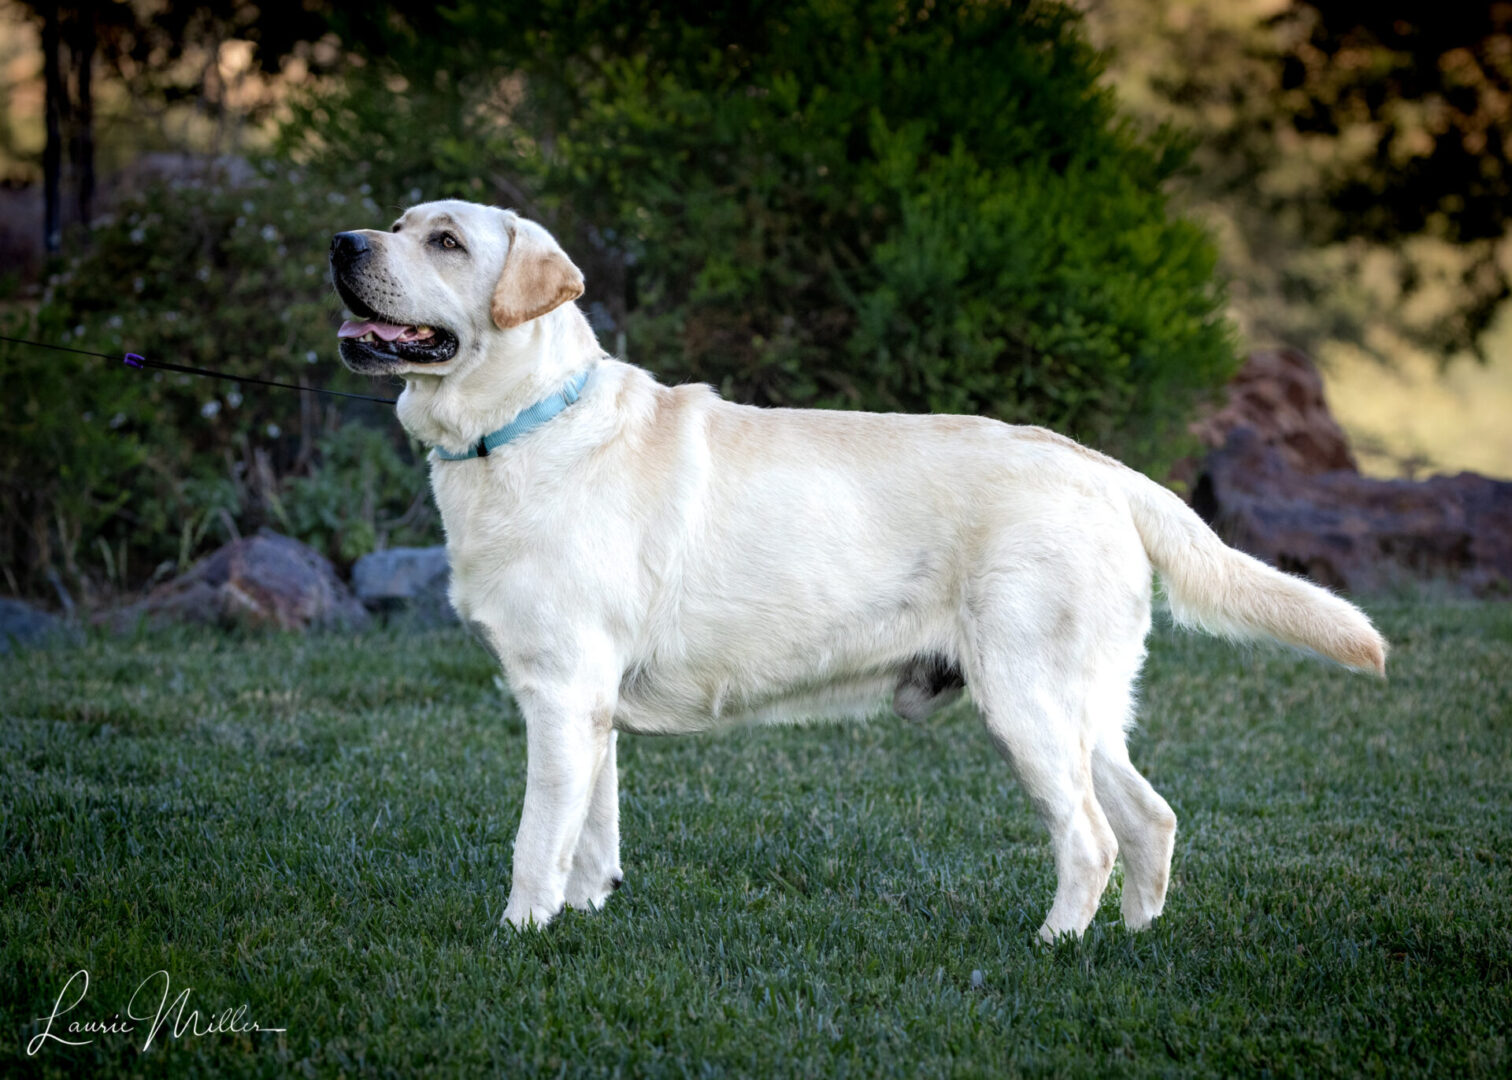 A white dog standing in the grass with its mouth open.